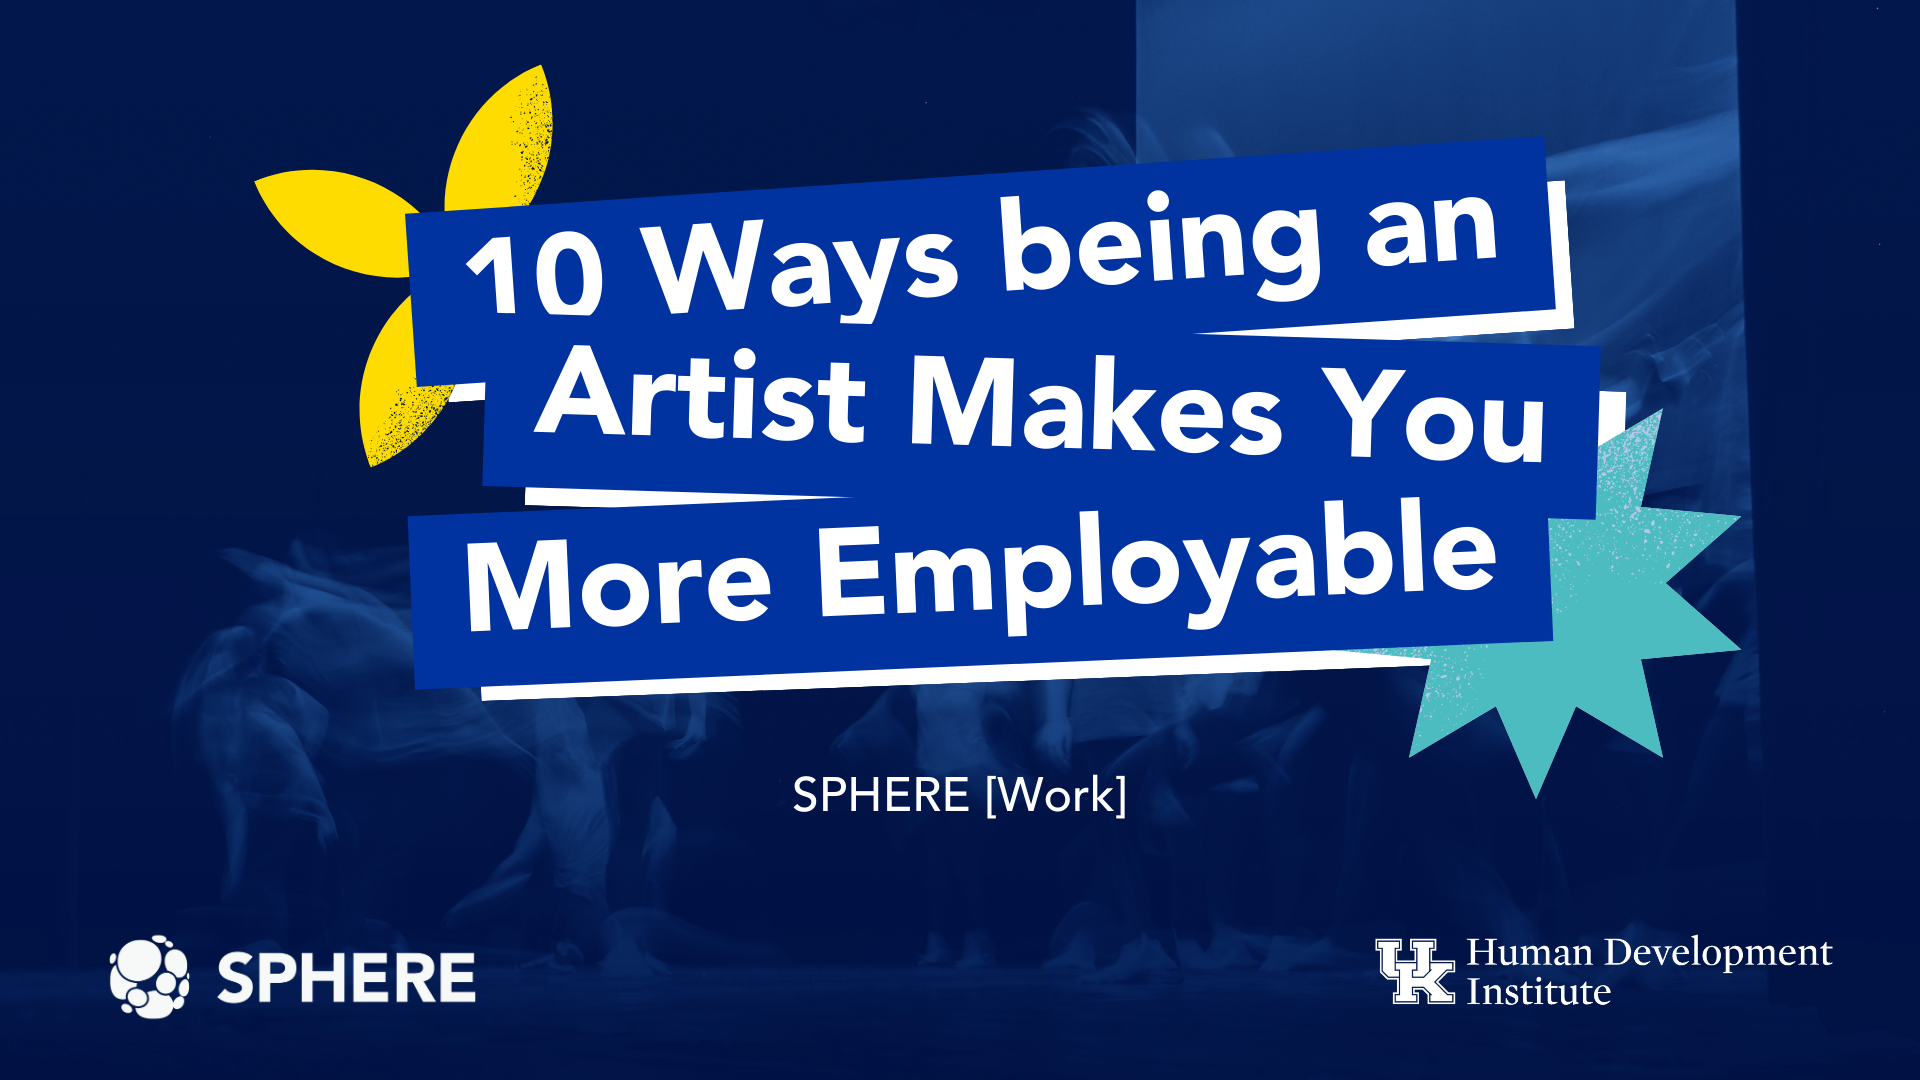 10 Ways being an Artist Makes You More Employable